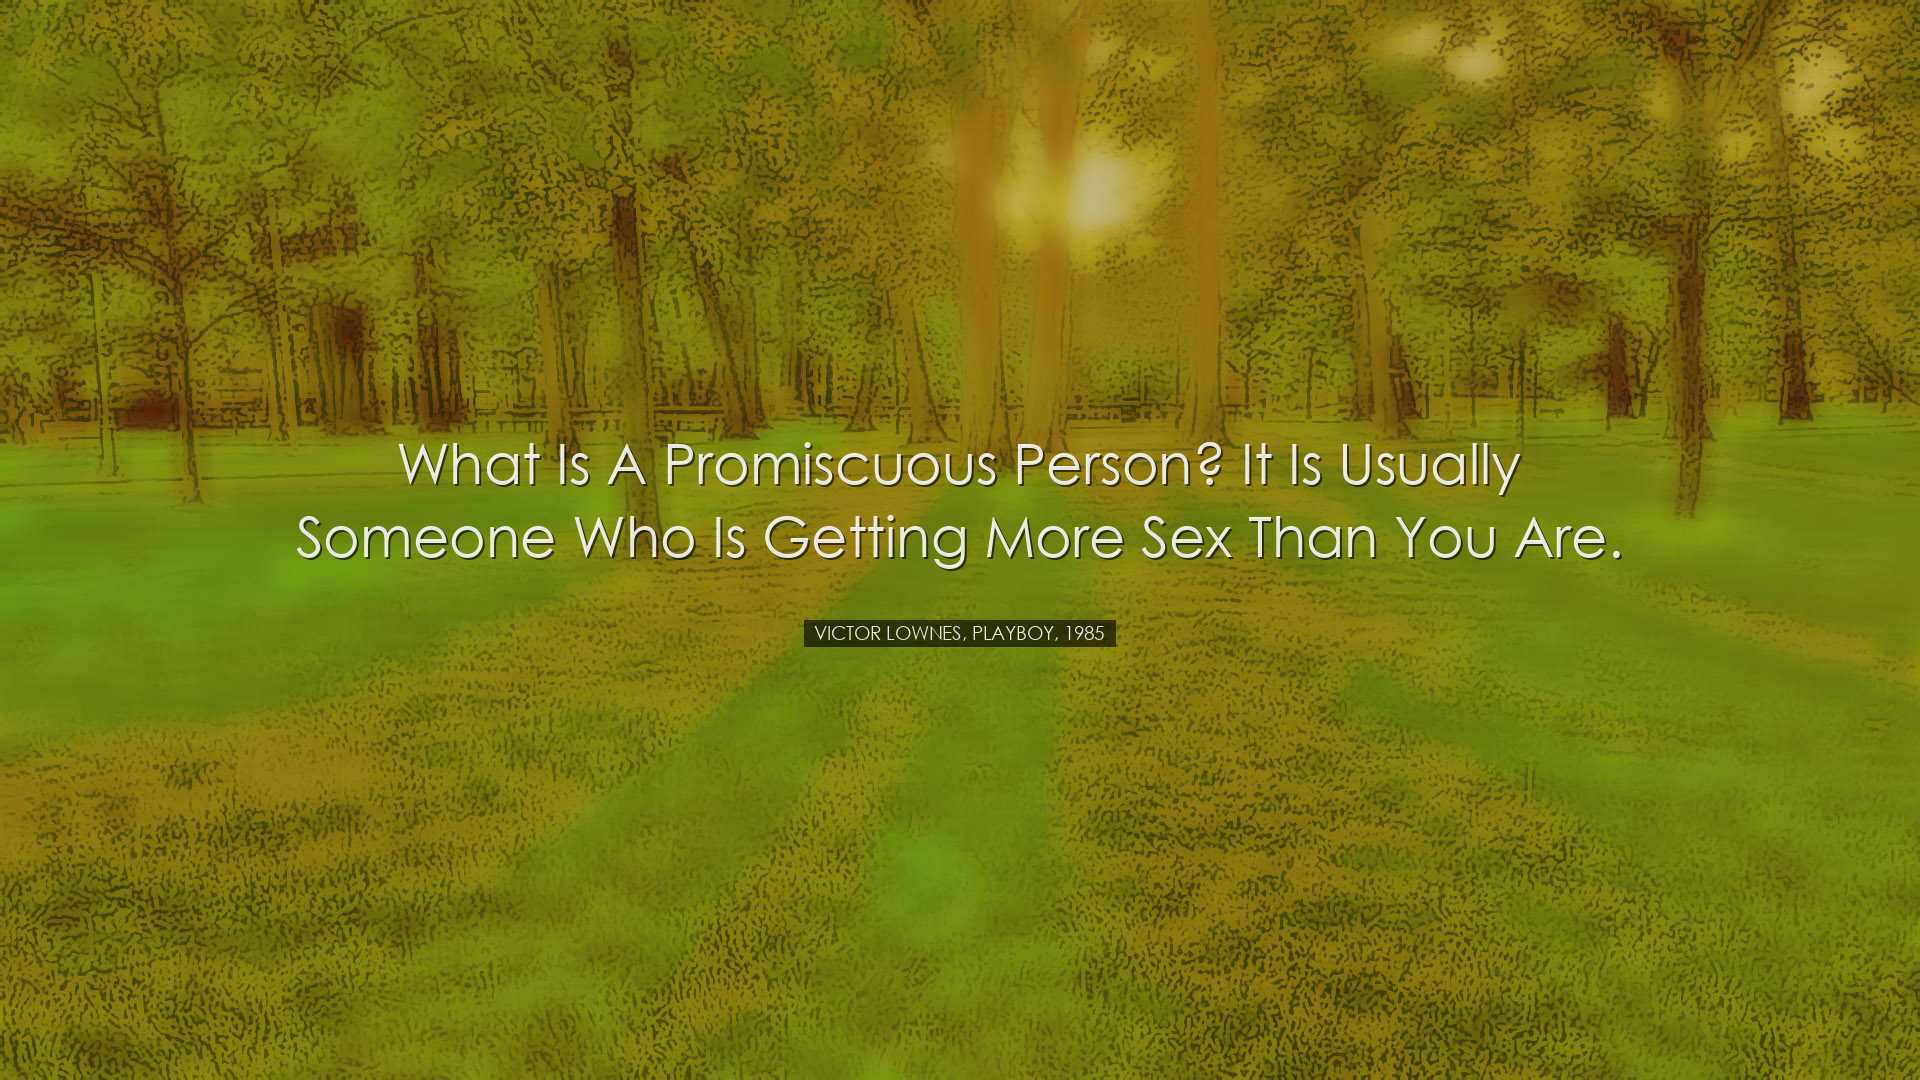 What is a promiscuous person? It is usually someone who is getting